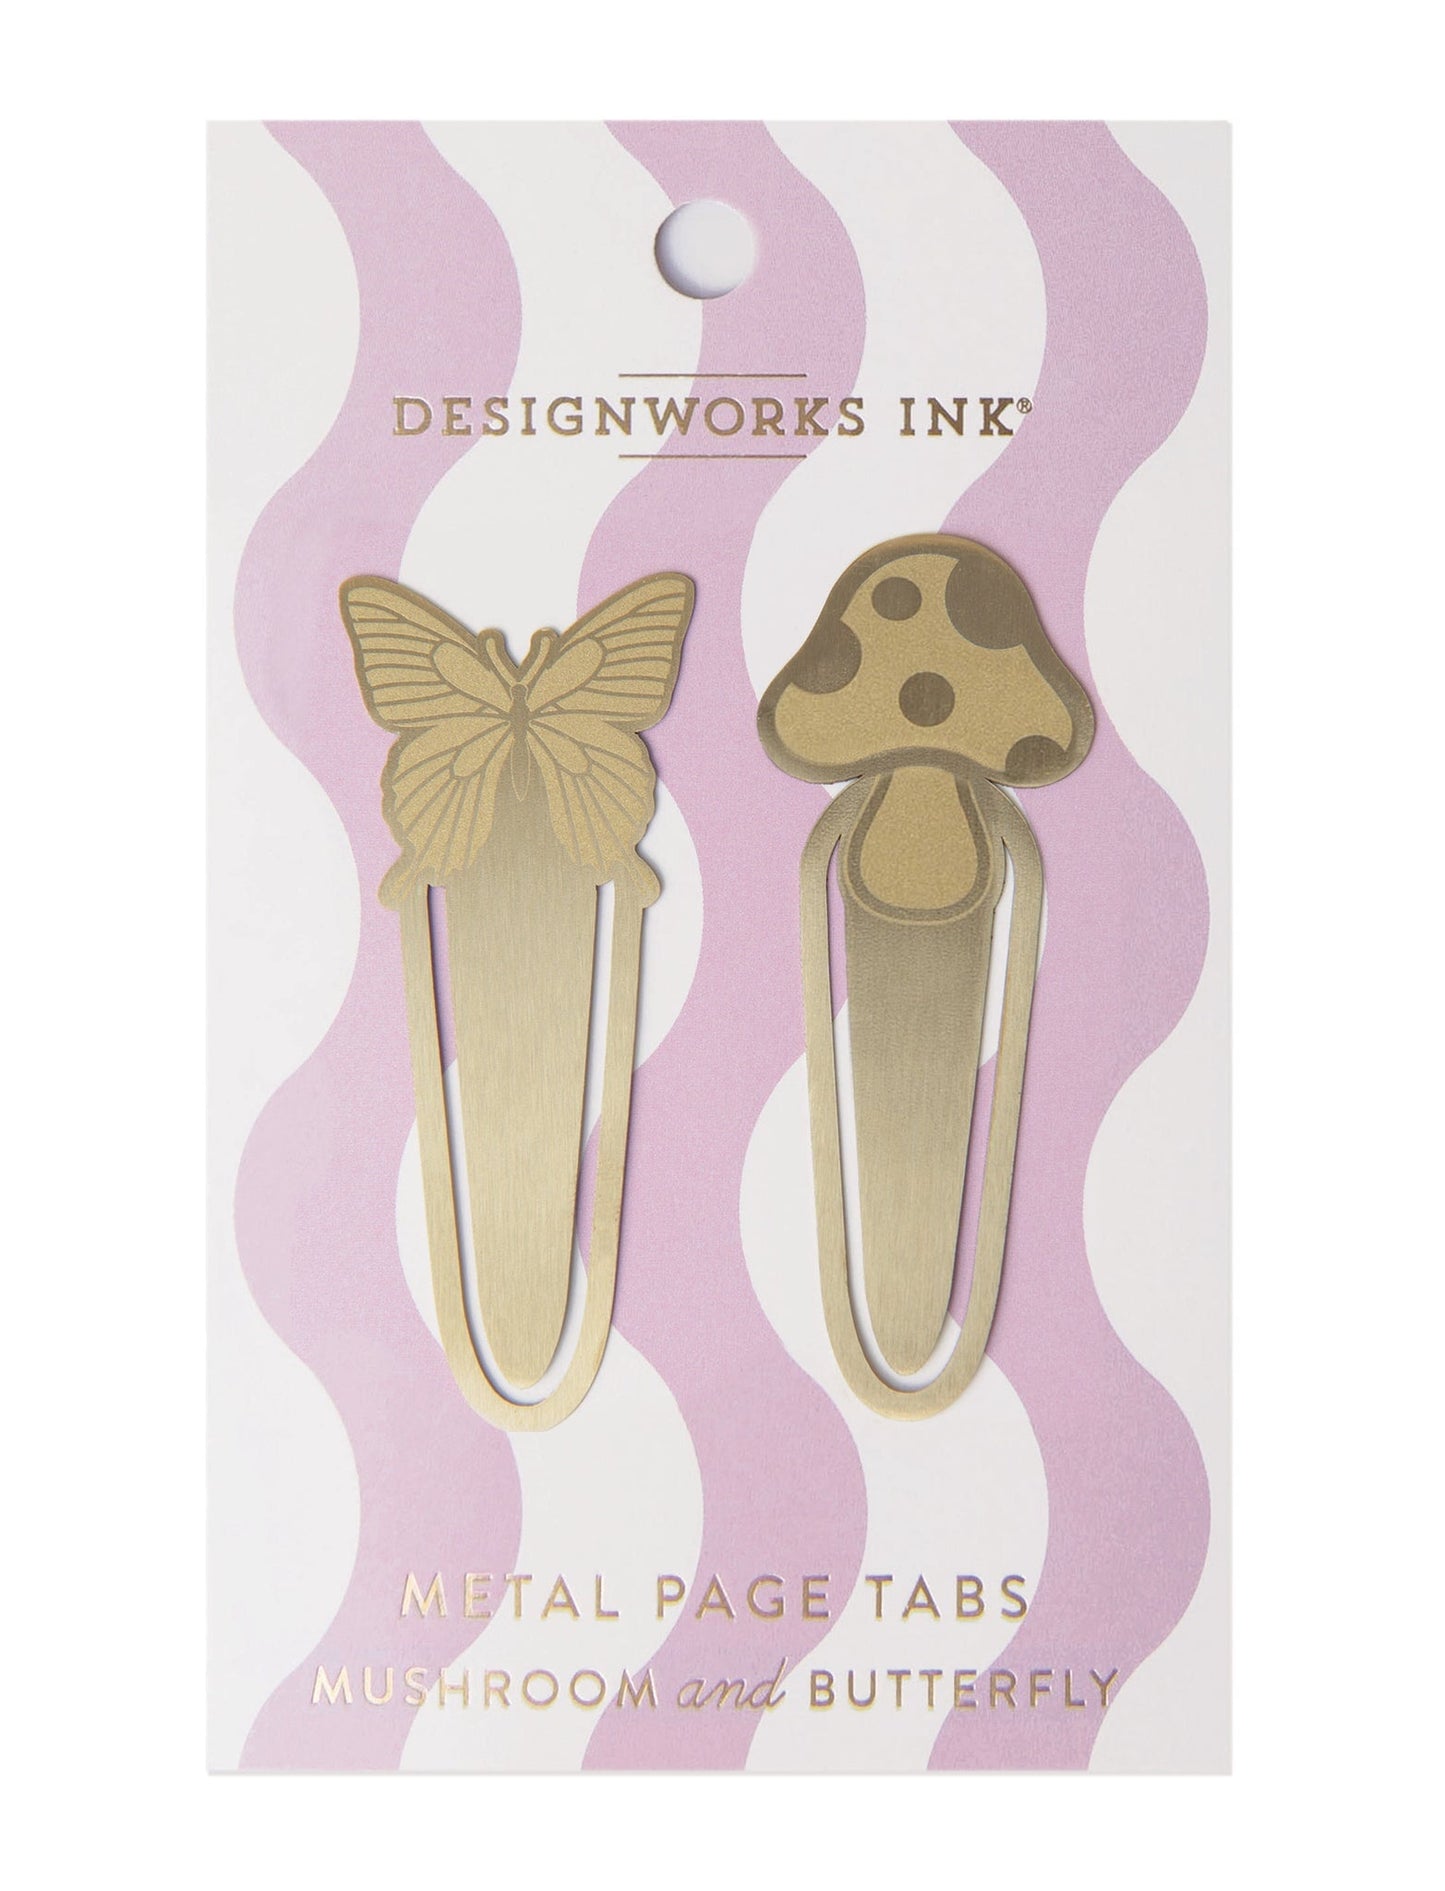 set of two gold colored metal page tabs, one with a butterfly design and one with a mushroom design